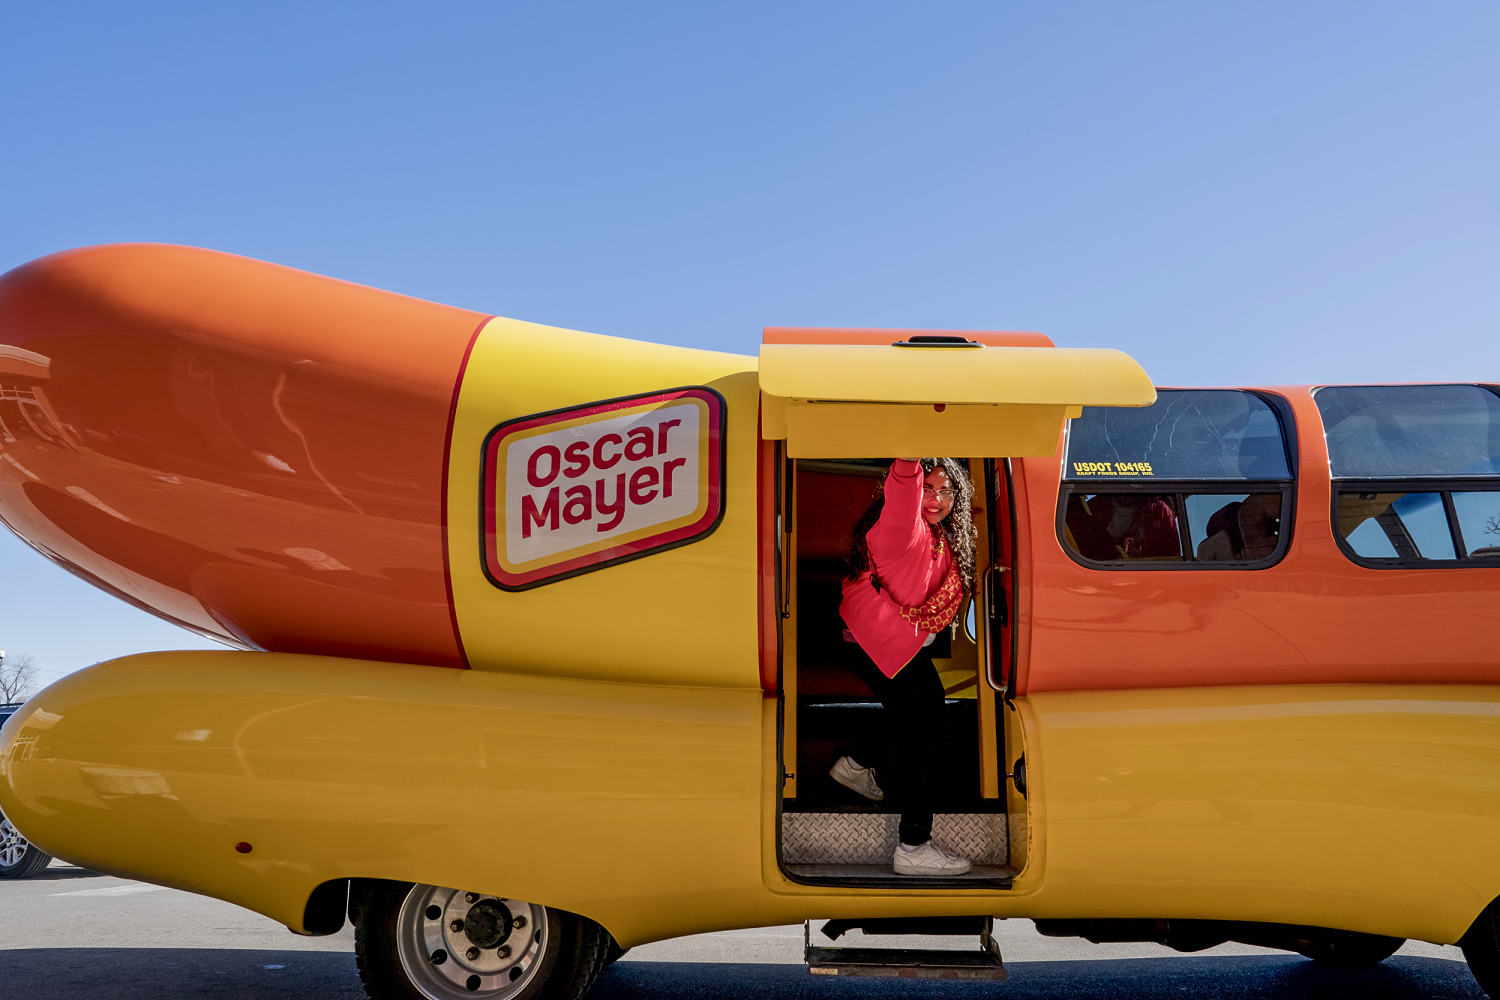 Oscar Mayer in search of next 'hotdoggers' to drive the Weinermobile — for $35,600 a year